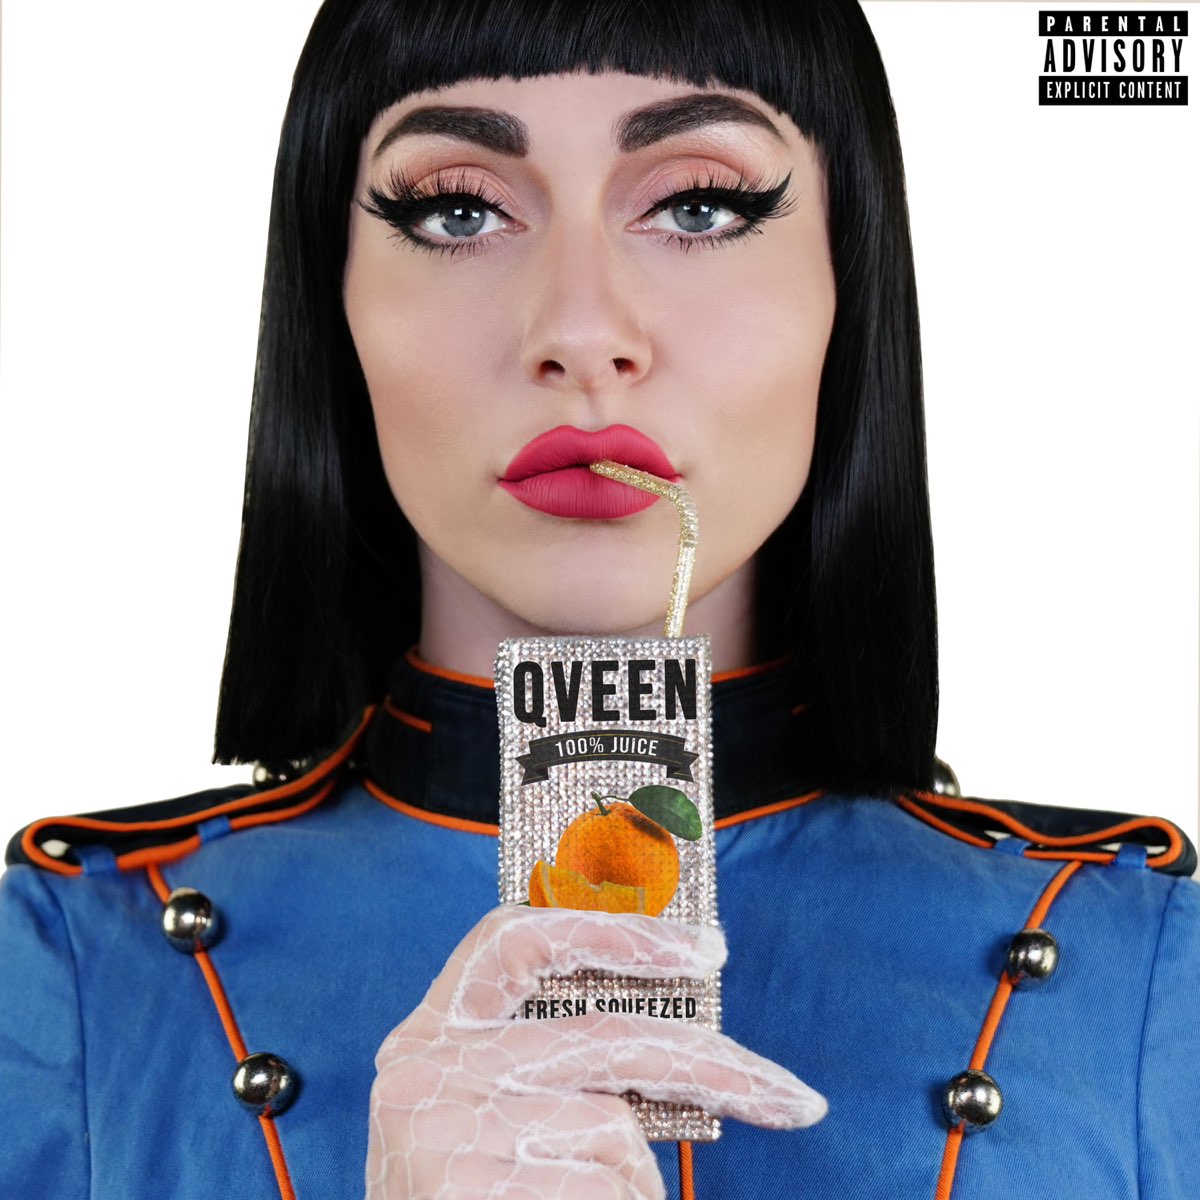 Qveen Herby Juice cover artwork